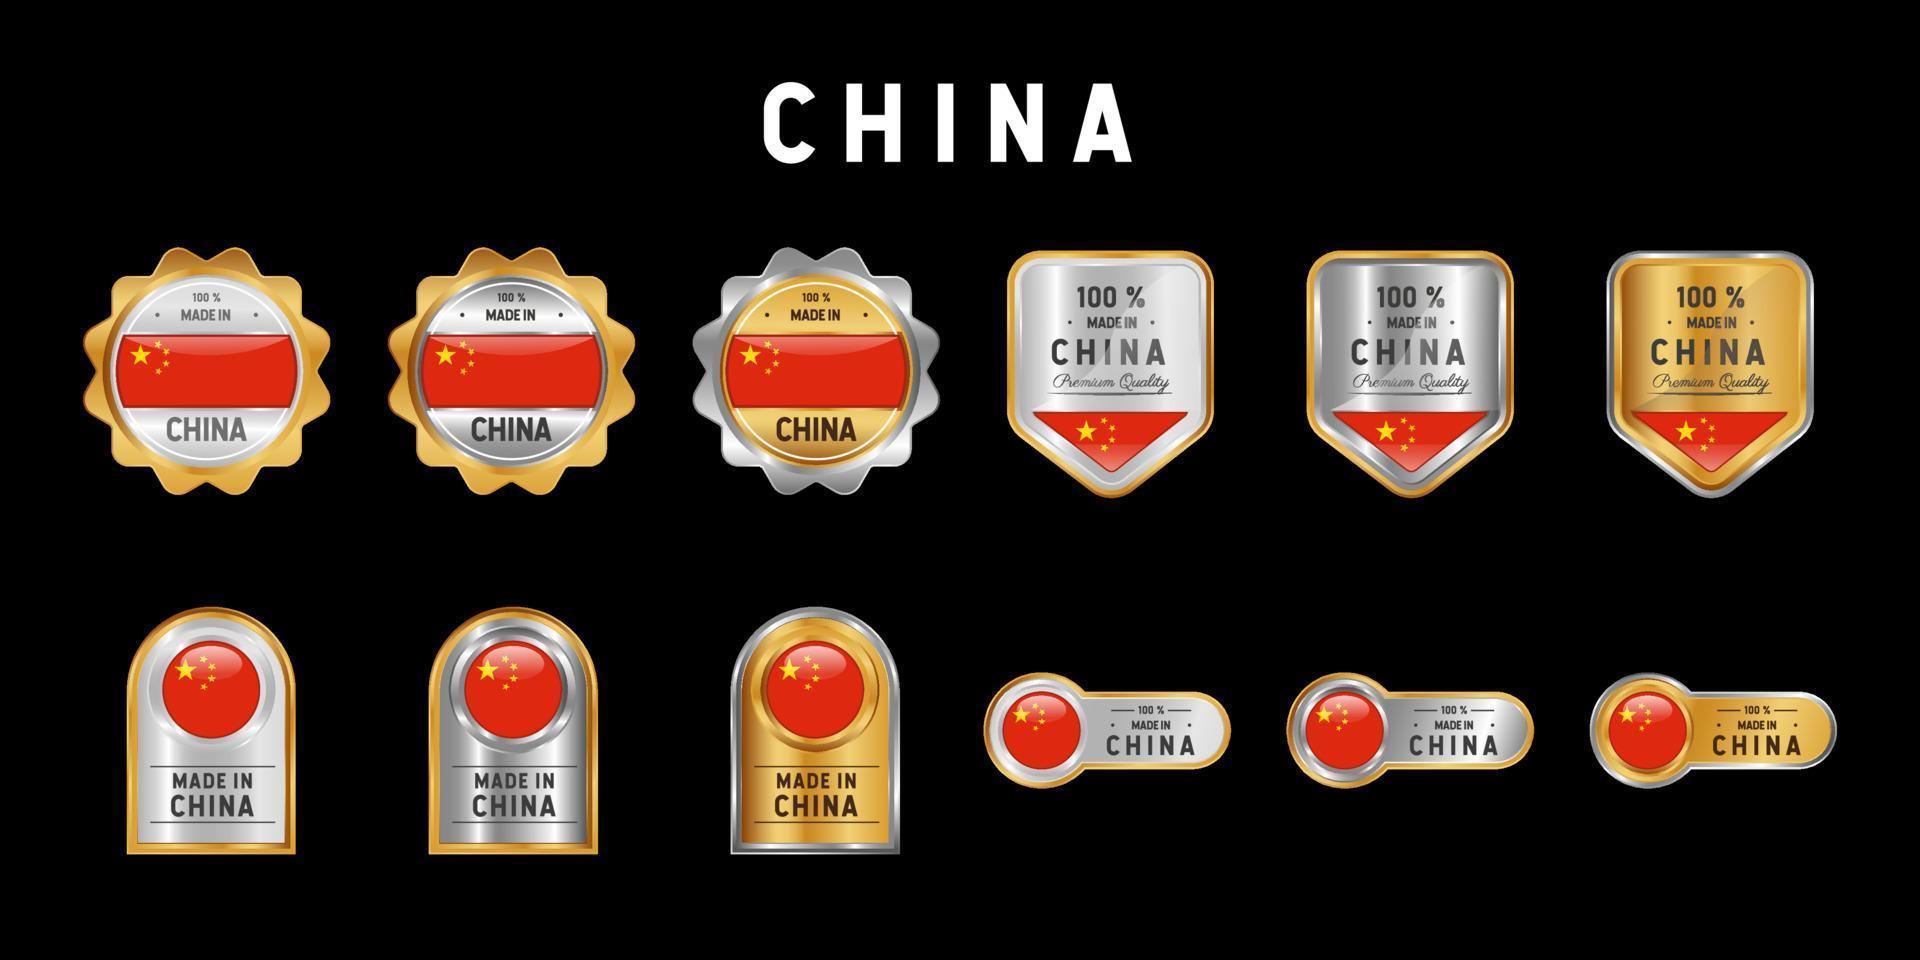 Made in China Label, Stamp, Badge, or Logo. With The National Flag of China. On platinum, gold, and silver colors. Premium and Luxury Emblem vector